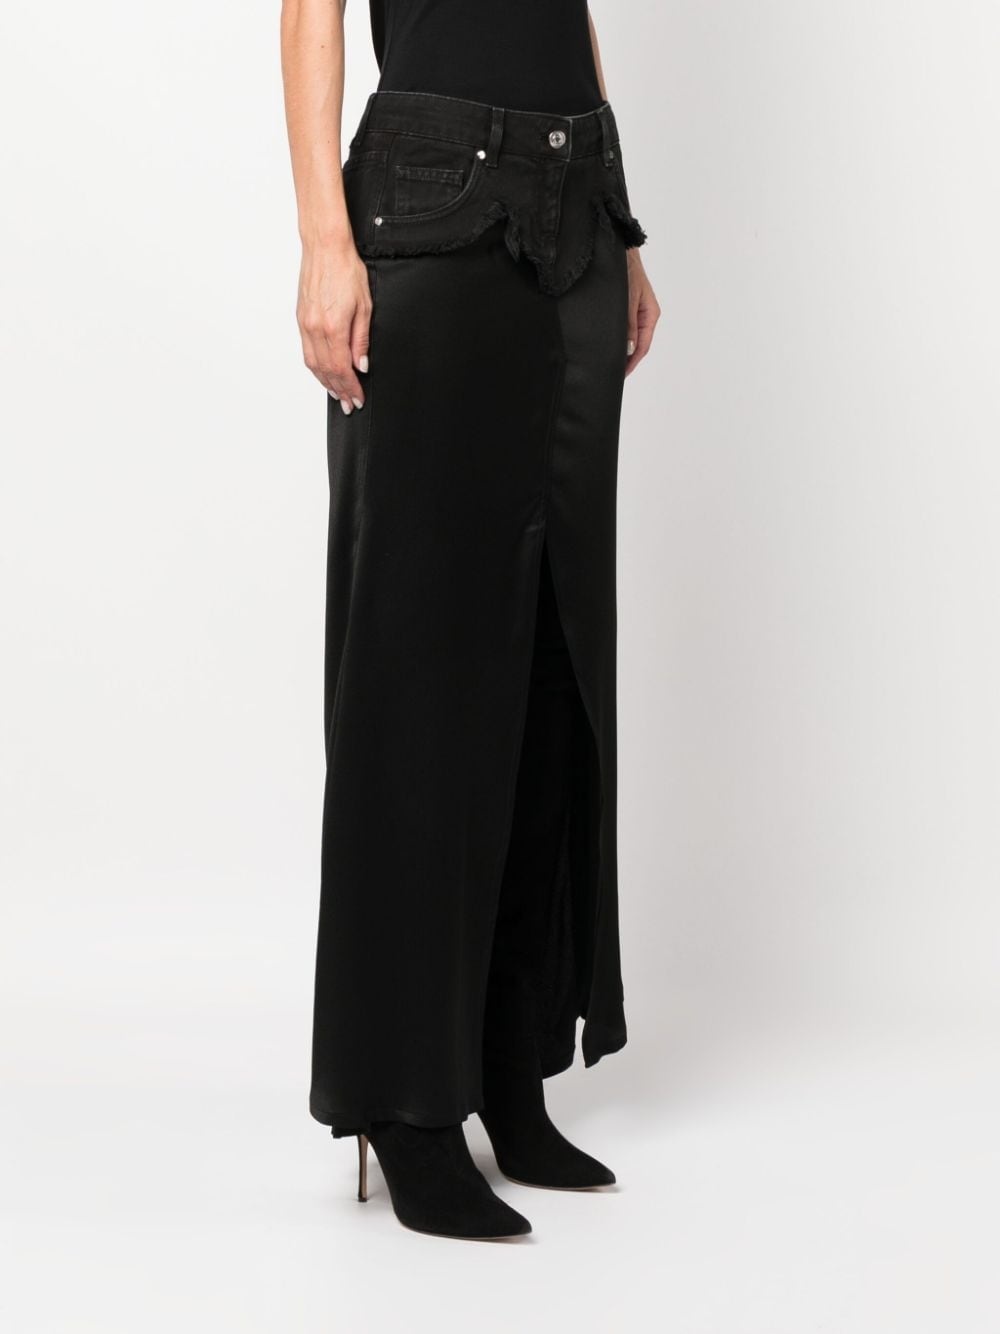 layered detail ankle-length skirt - 3